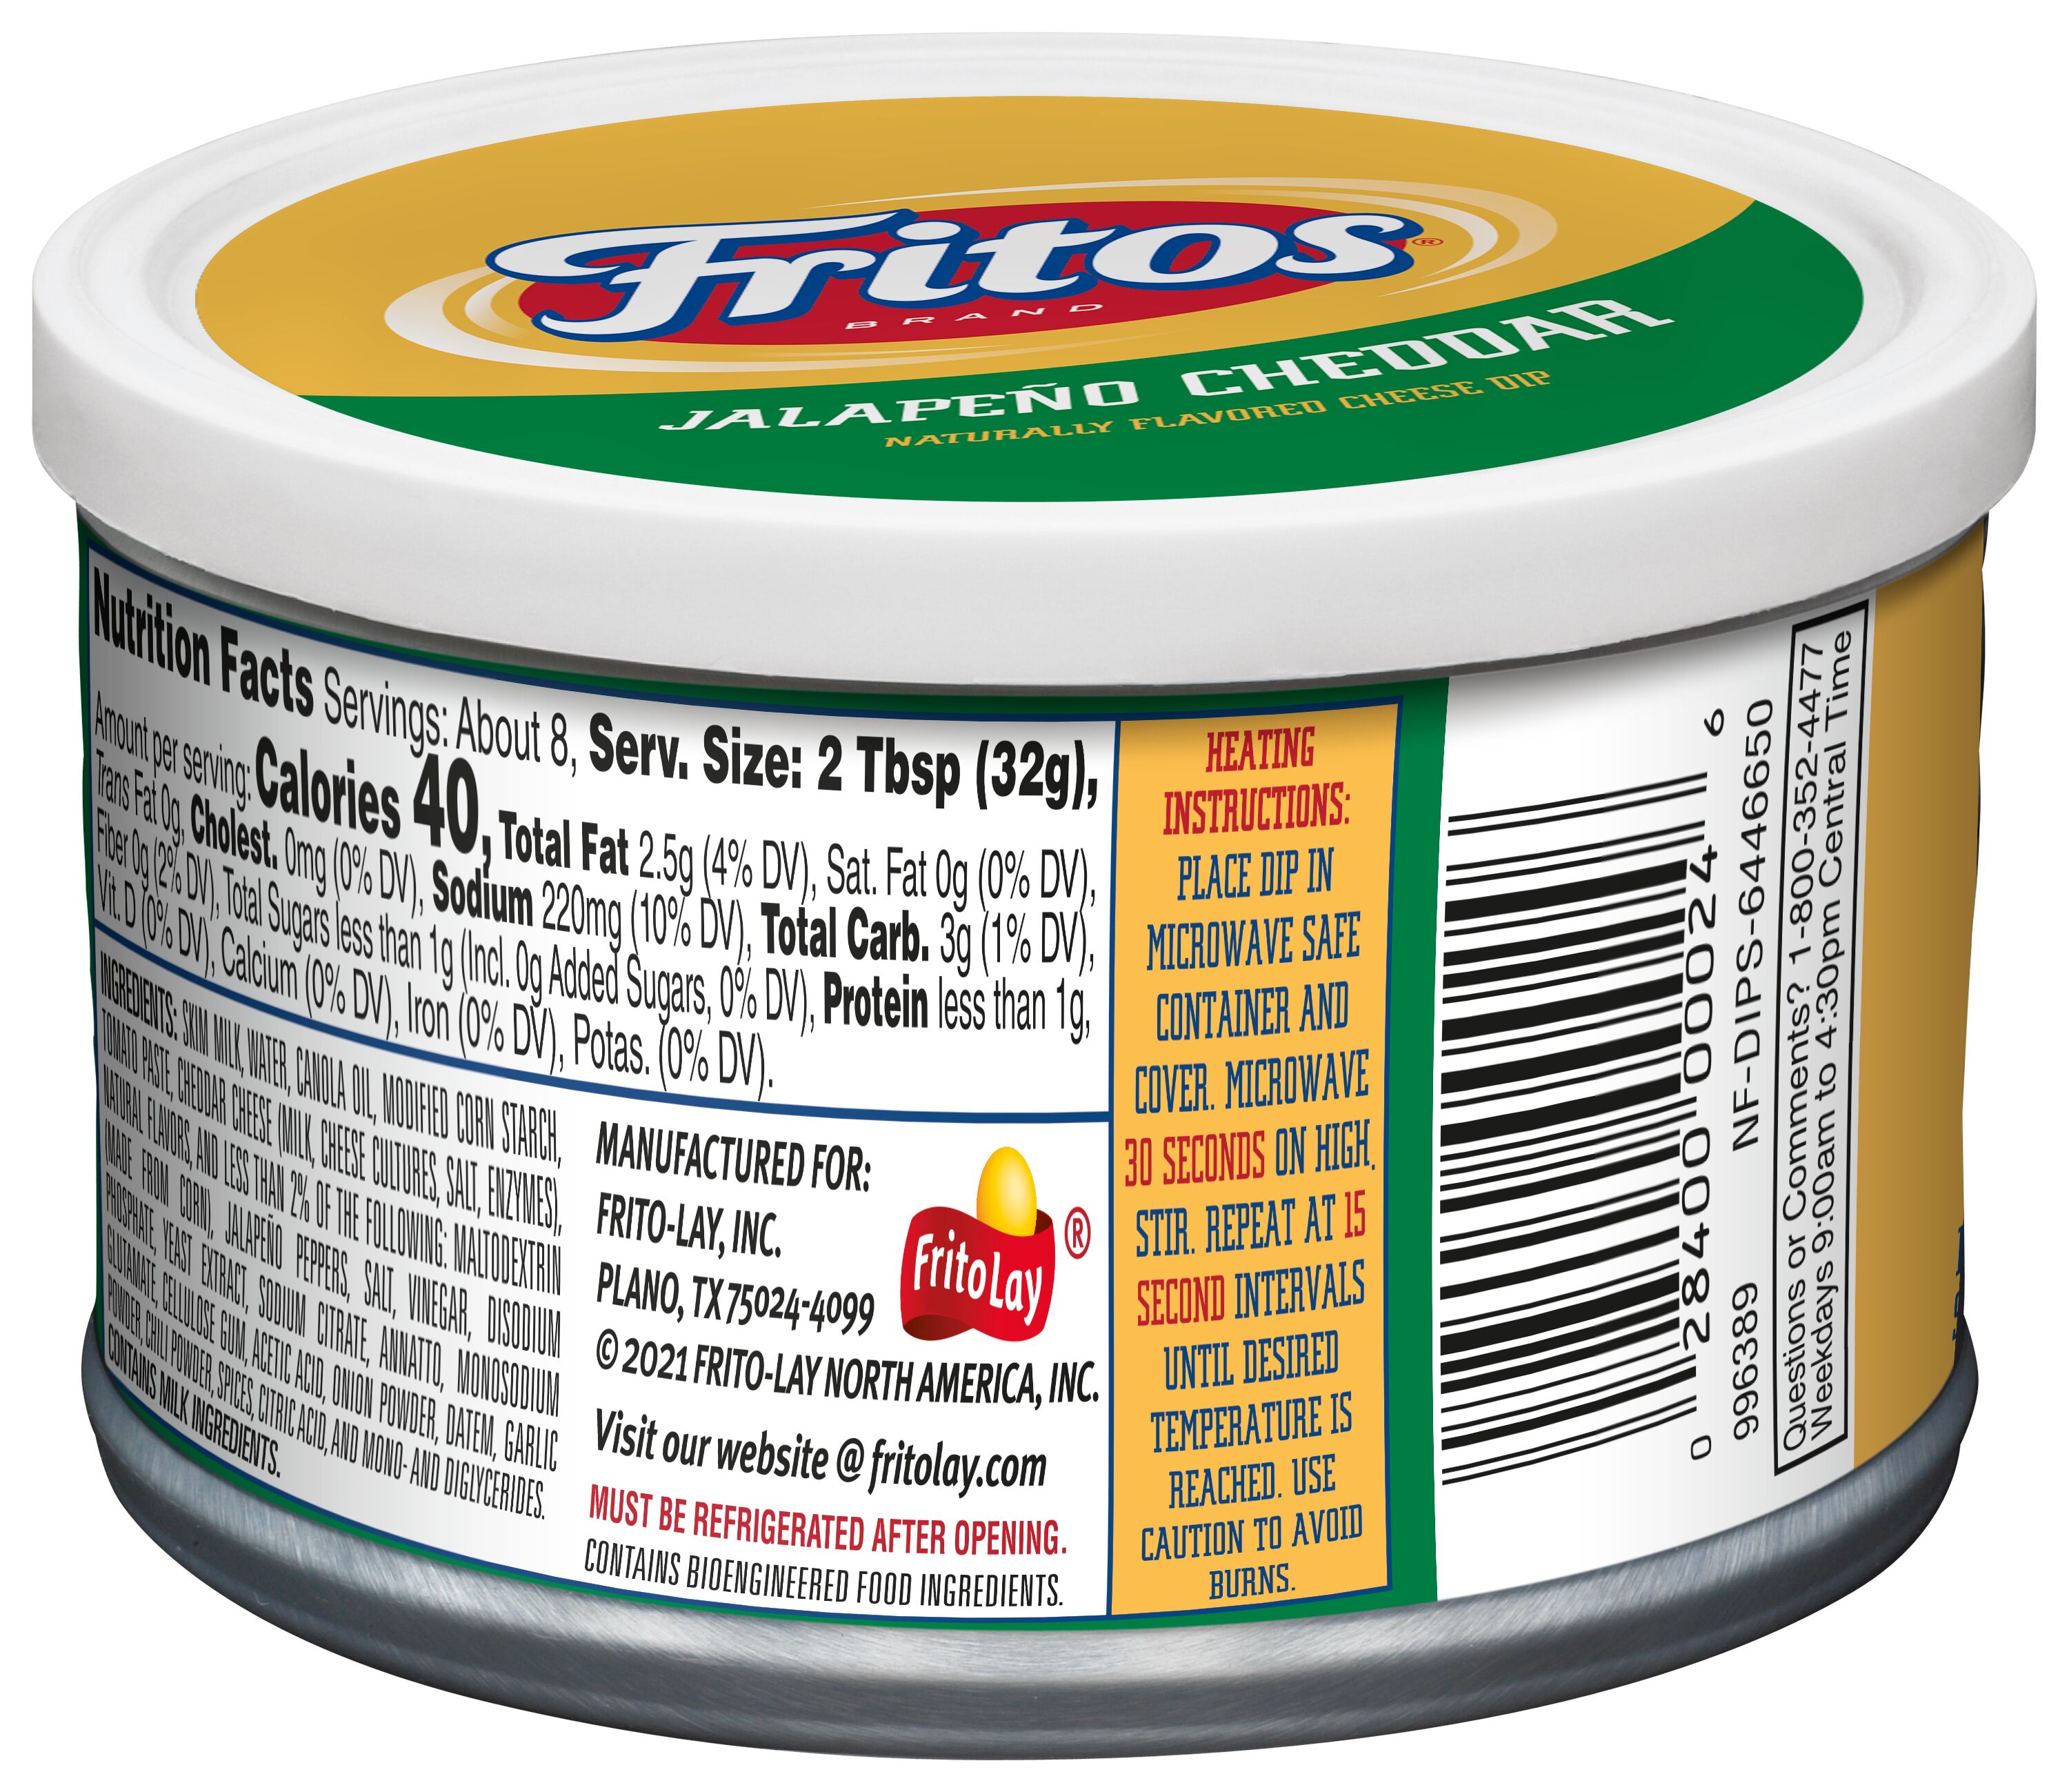 Fritos Jalapeno Cheddar Naturally Flavored Cheese Dip, Can 9 oz - image 3 of 6